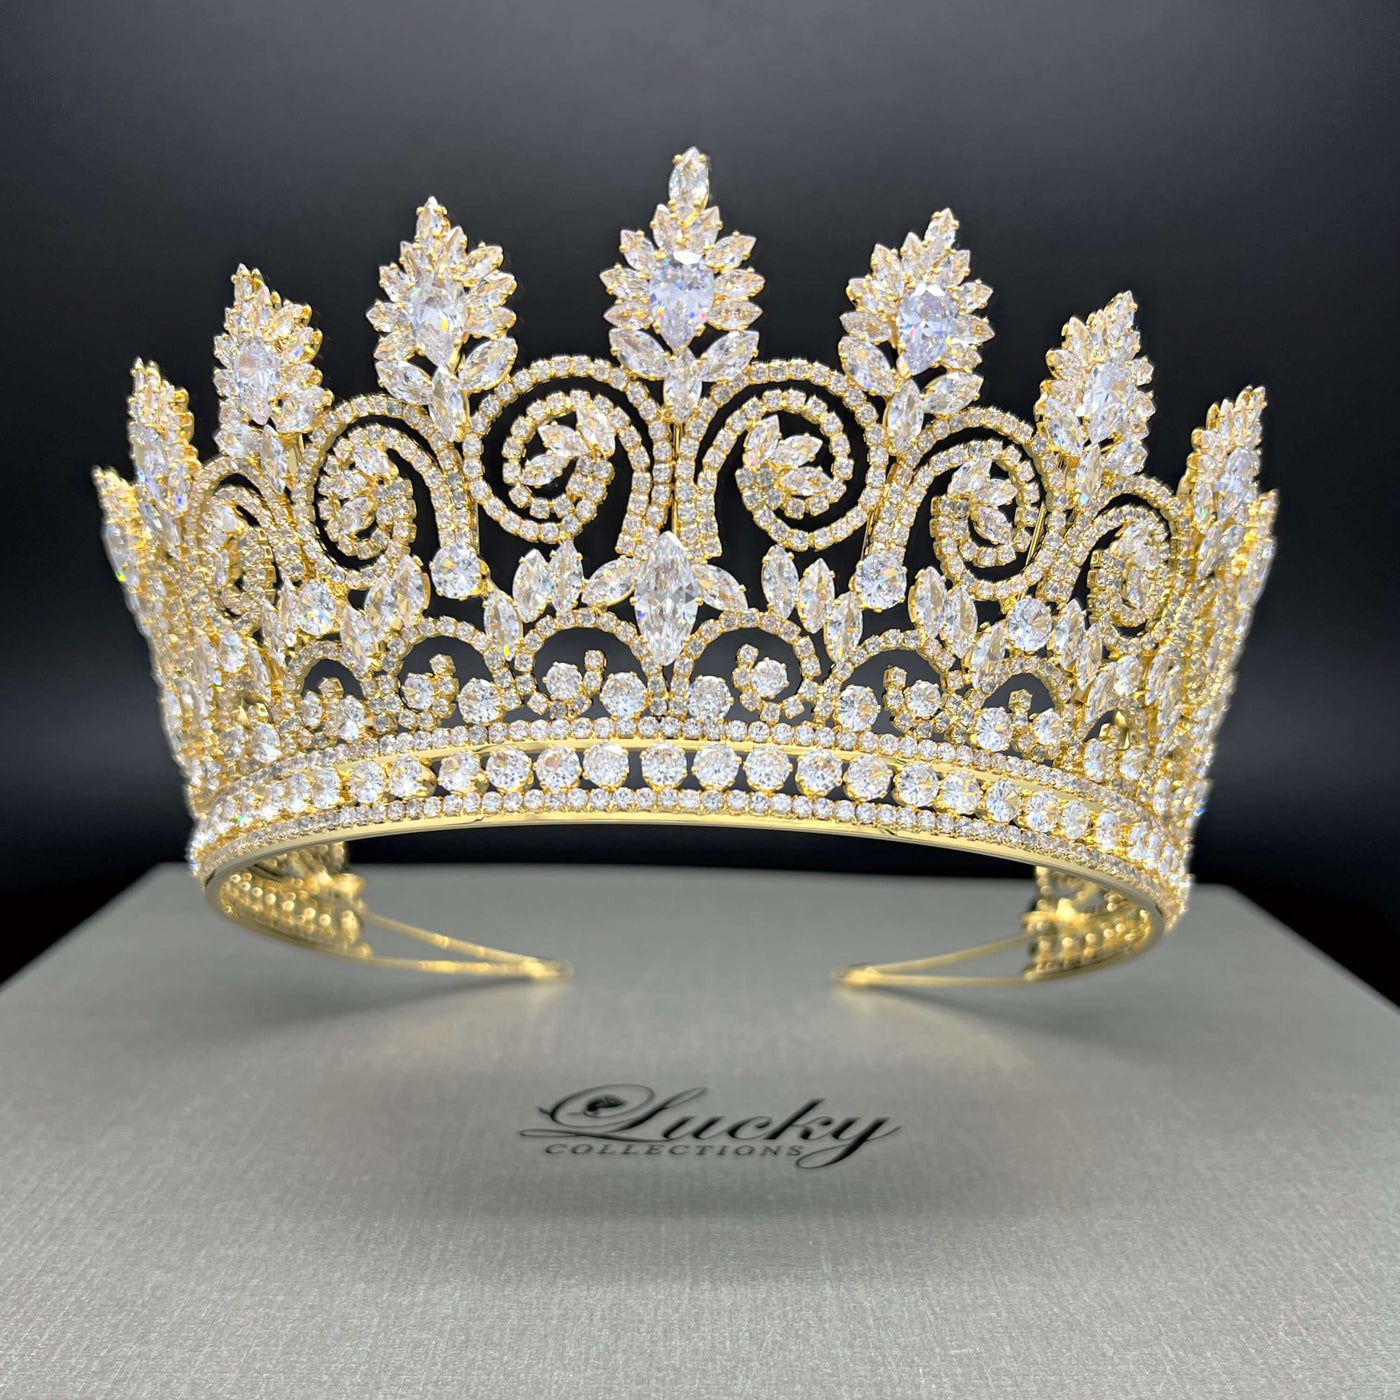 Wedding Tiara, Finest Cut Zirconia For a Magnificent Look & Sparkle by Lucky Collections ™